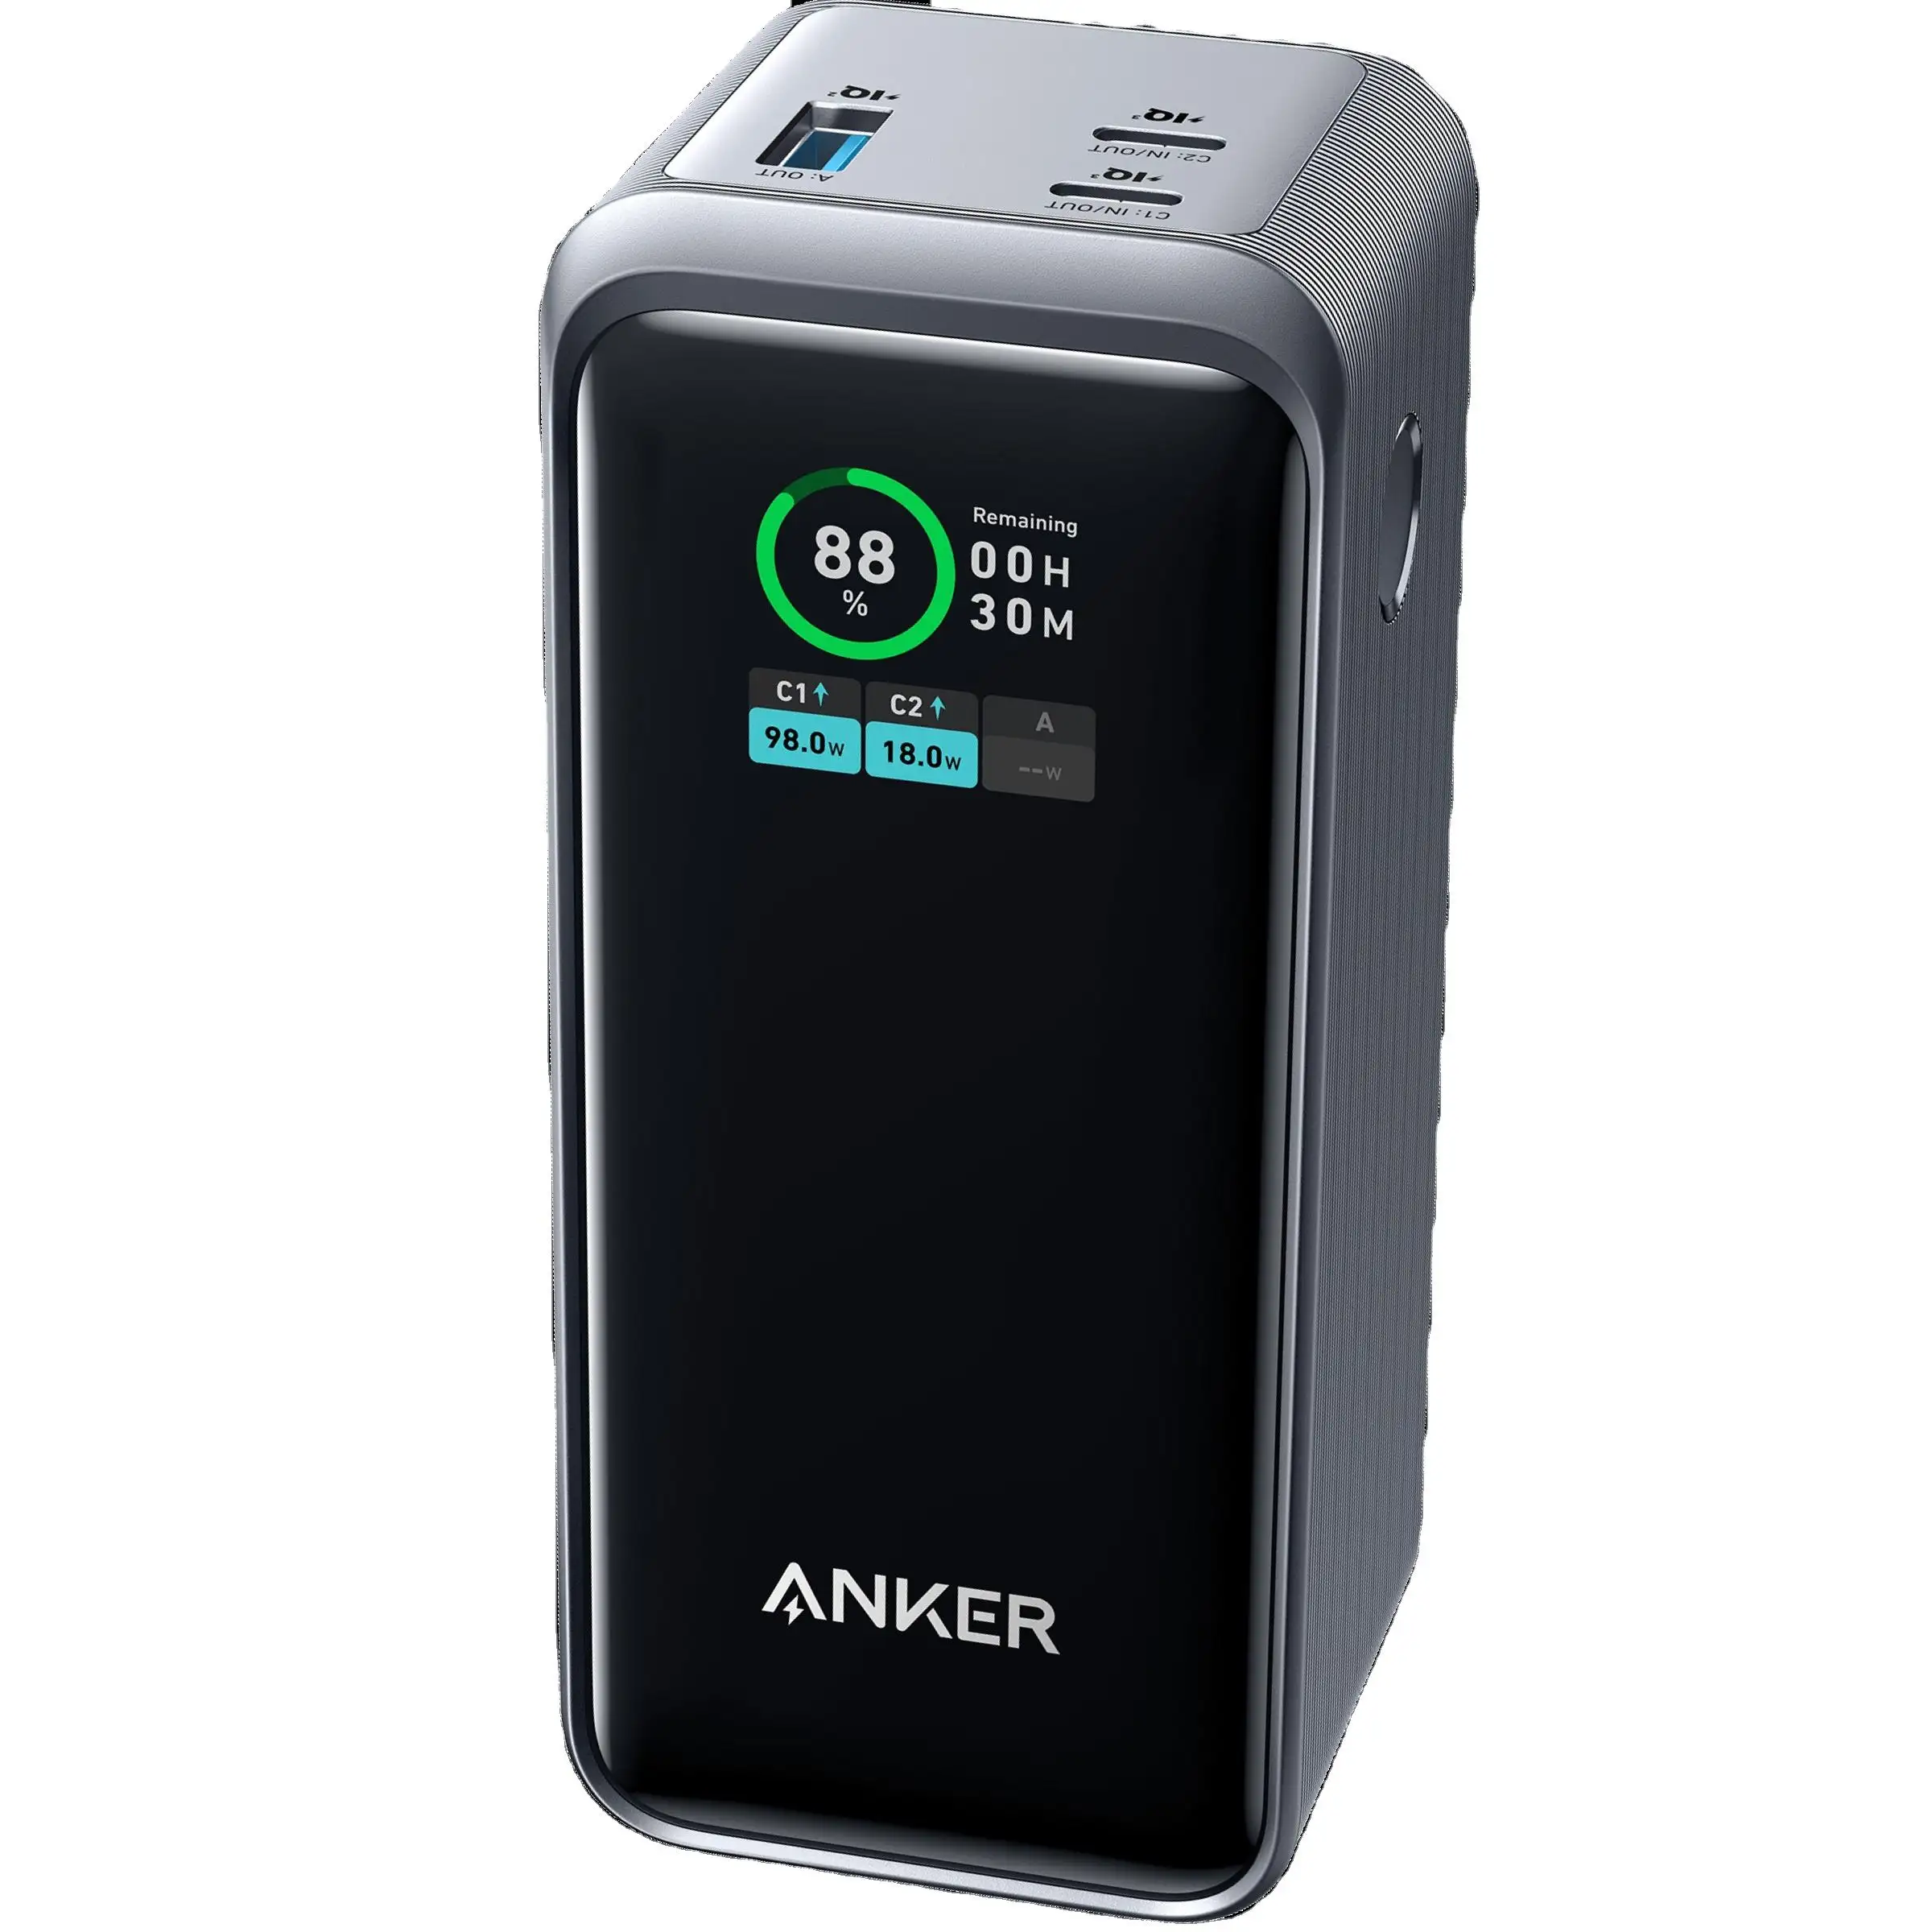 Anker Prime 12,000mAh Power Bank 130W two-way fast charging